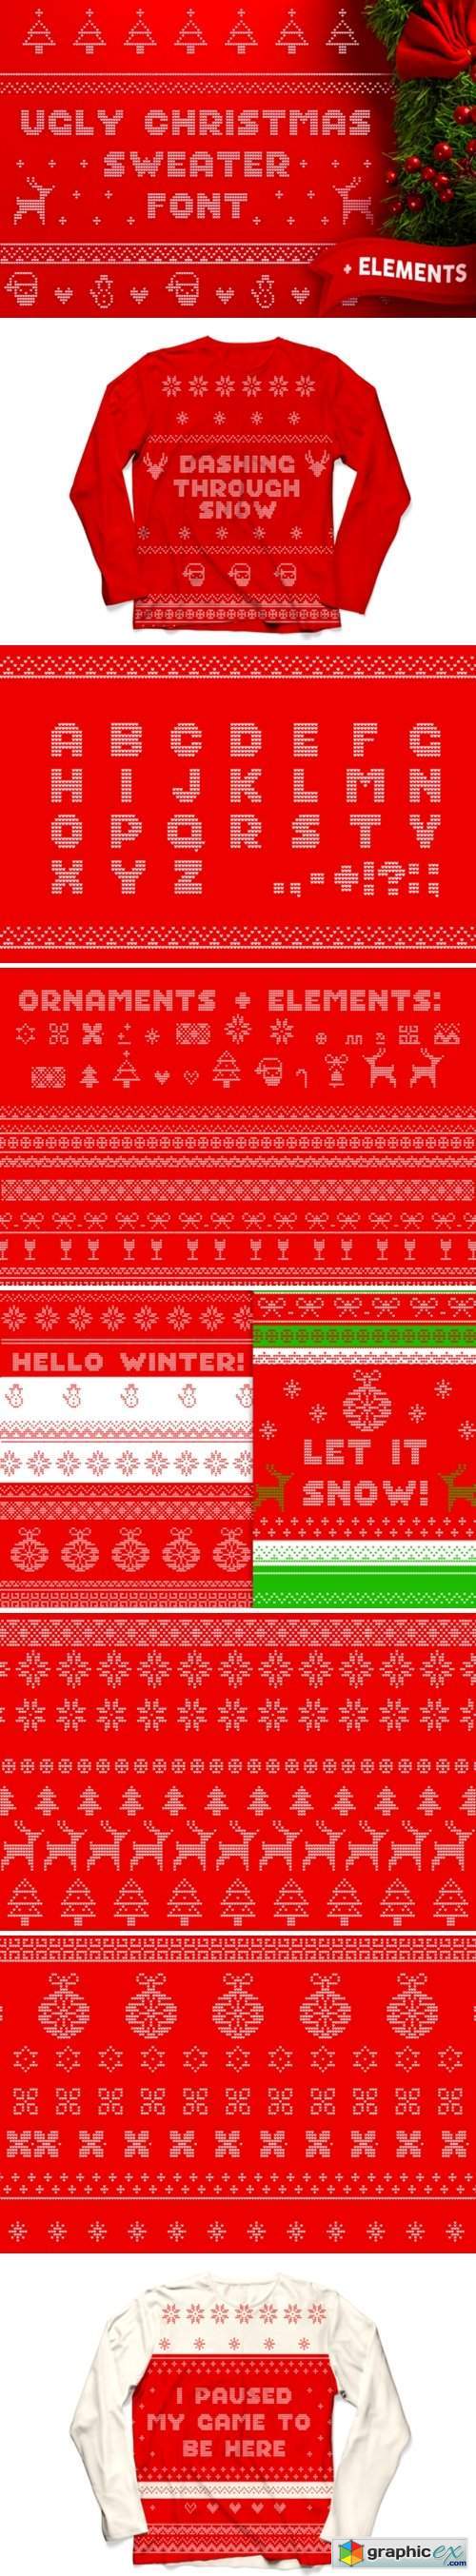 Ugly Christmas Sweater Font